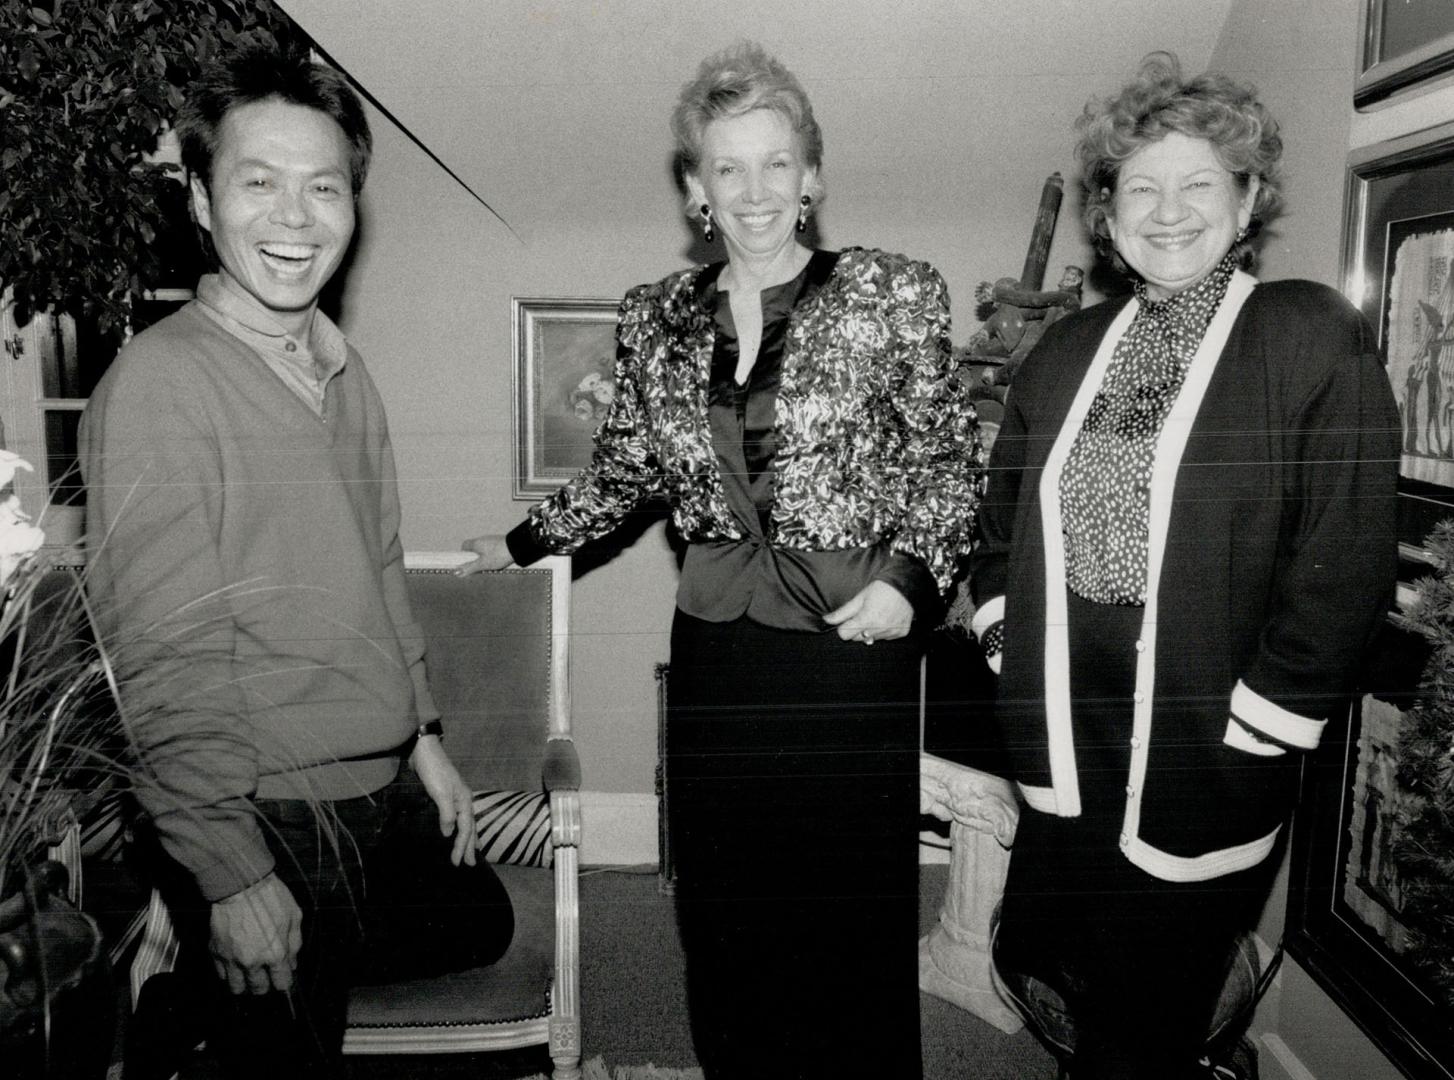 Above, from left, Peter Lam, with children's wear designer Elvira Valli, and Ann Ciona in a wool crepe evening skirt, and iridescent crinkle evening jacket of her design